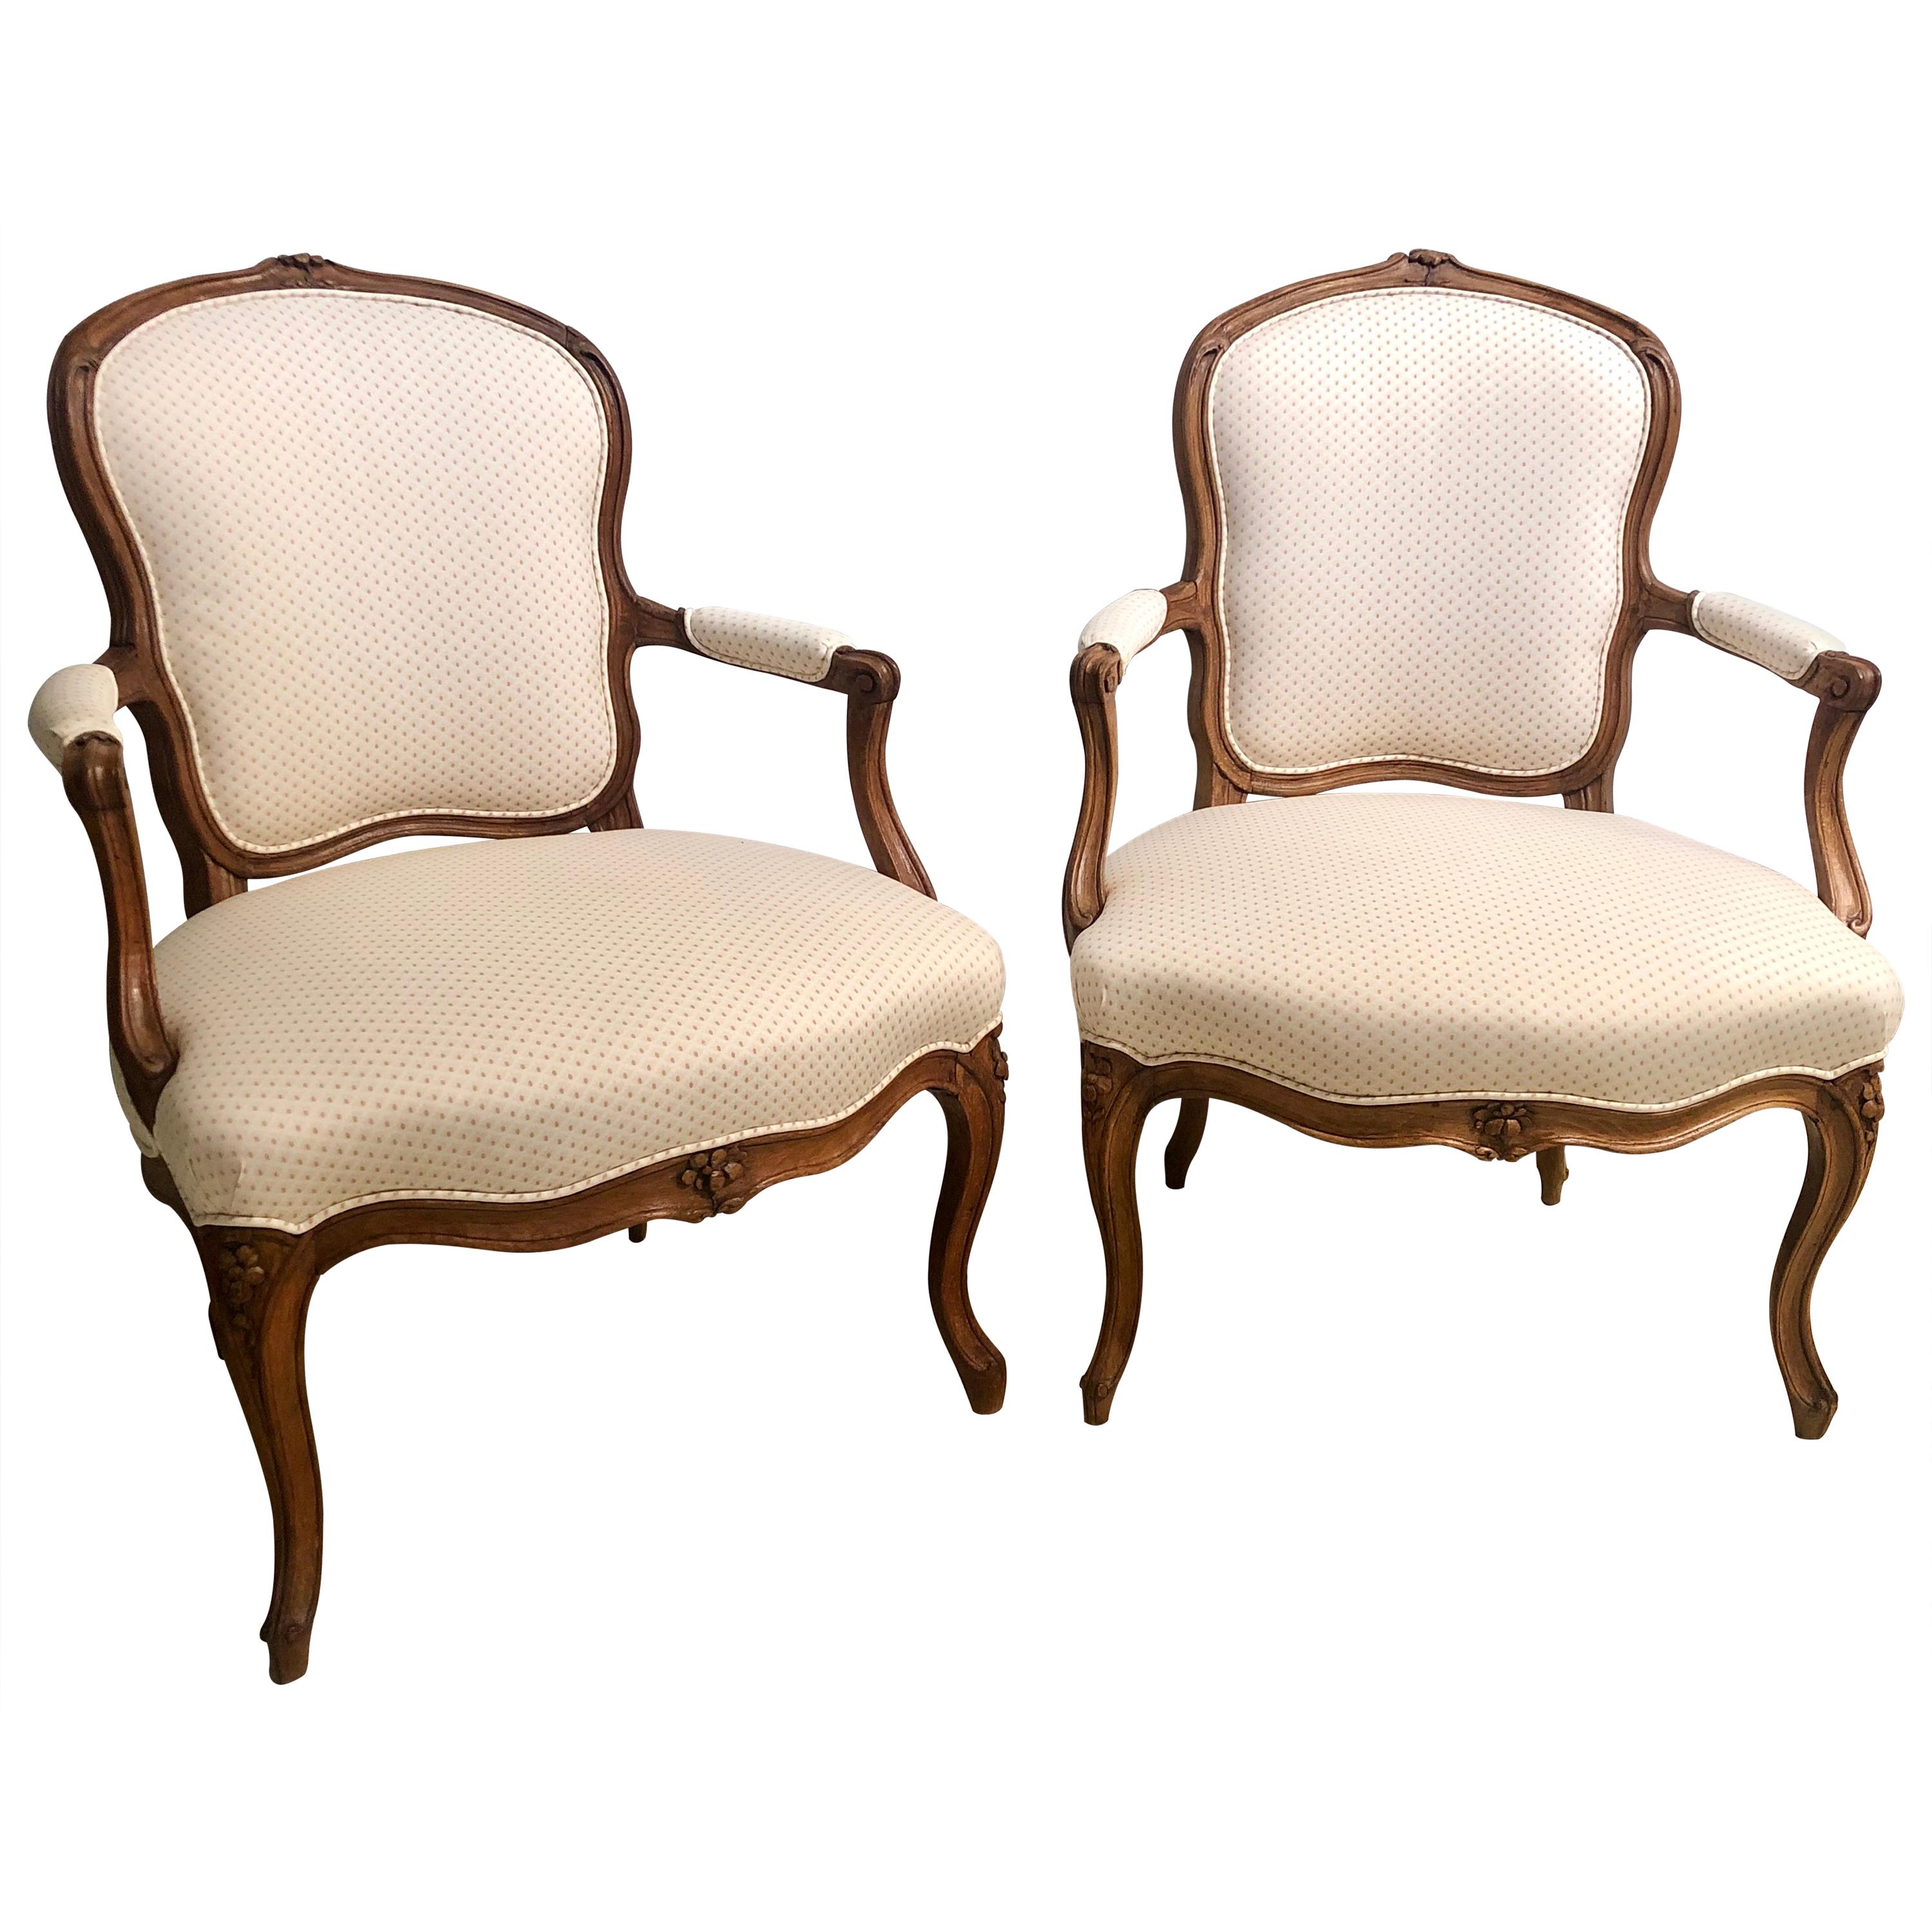 18th Century Pair of Beechwood Fauteuils or Armchairs with Provenance